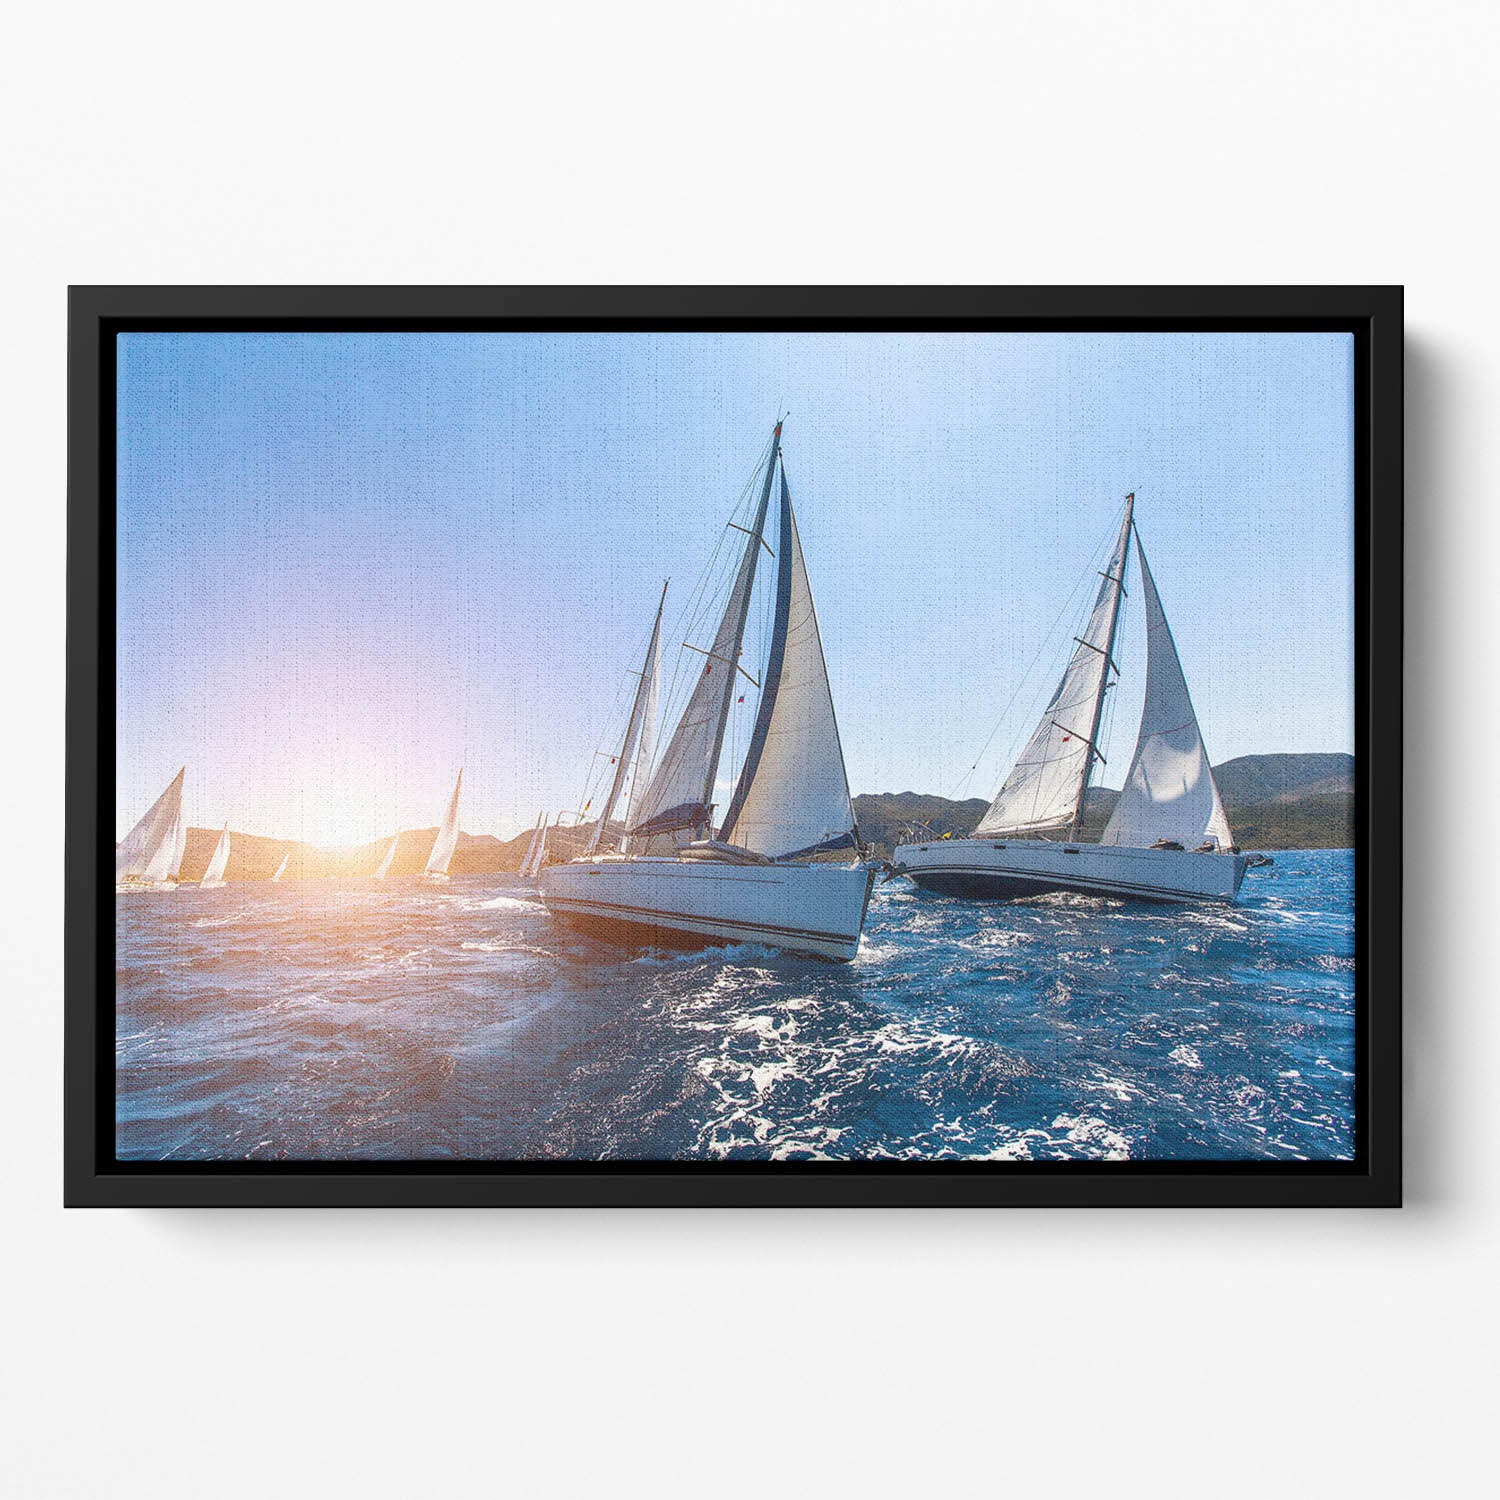 Sailing in the wind through the waves at the Sea Floating Framed Canvas